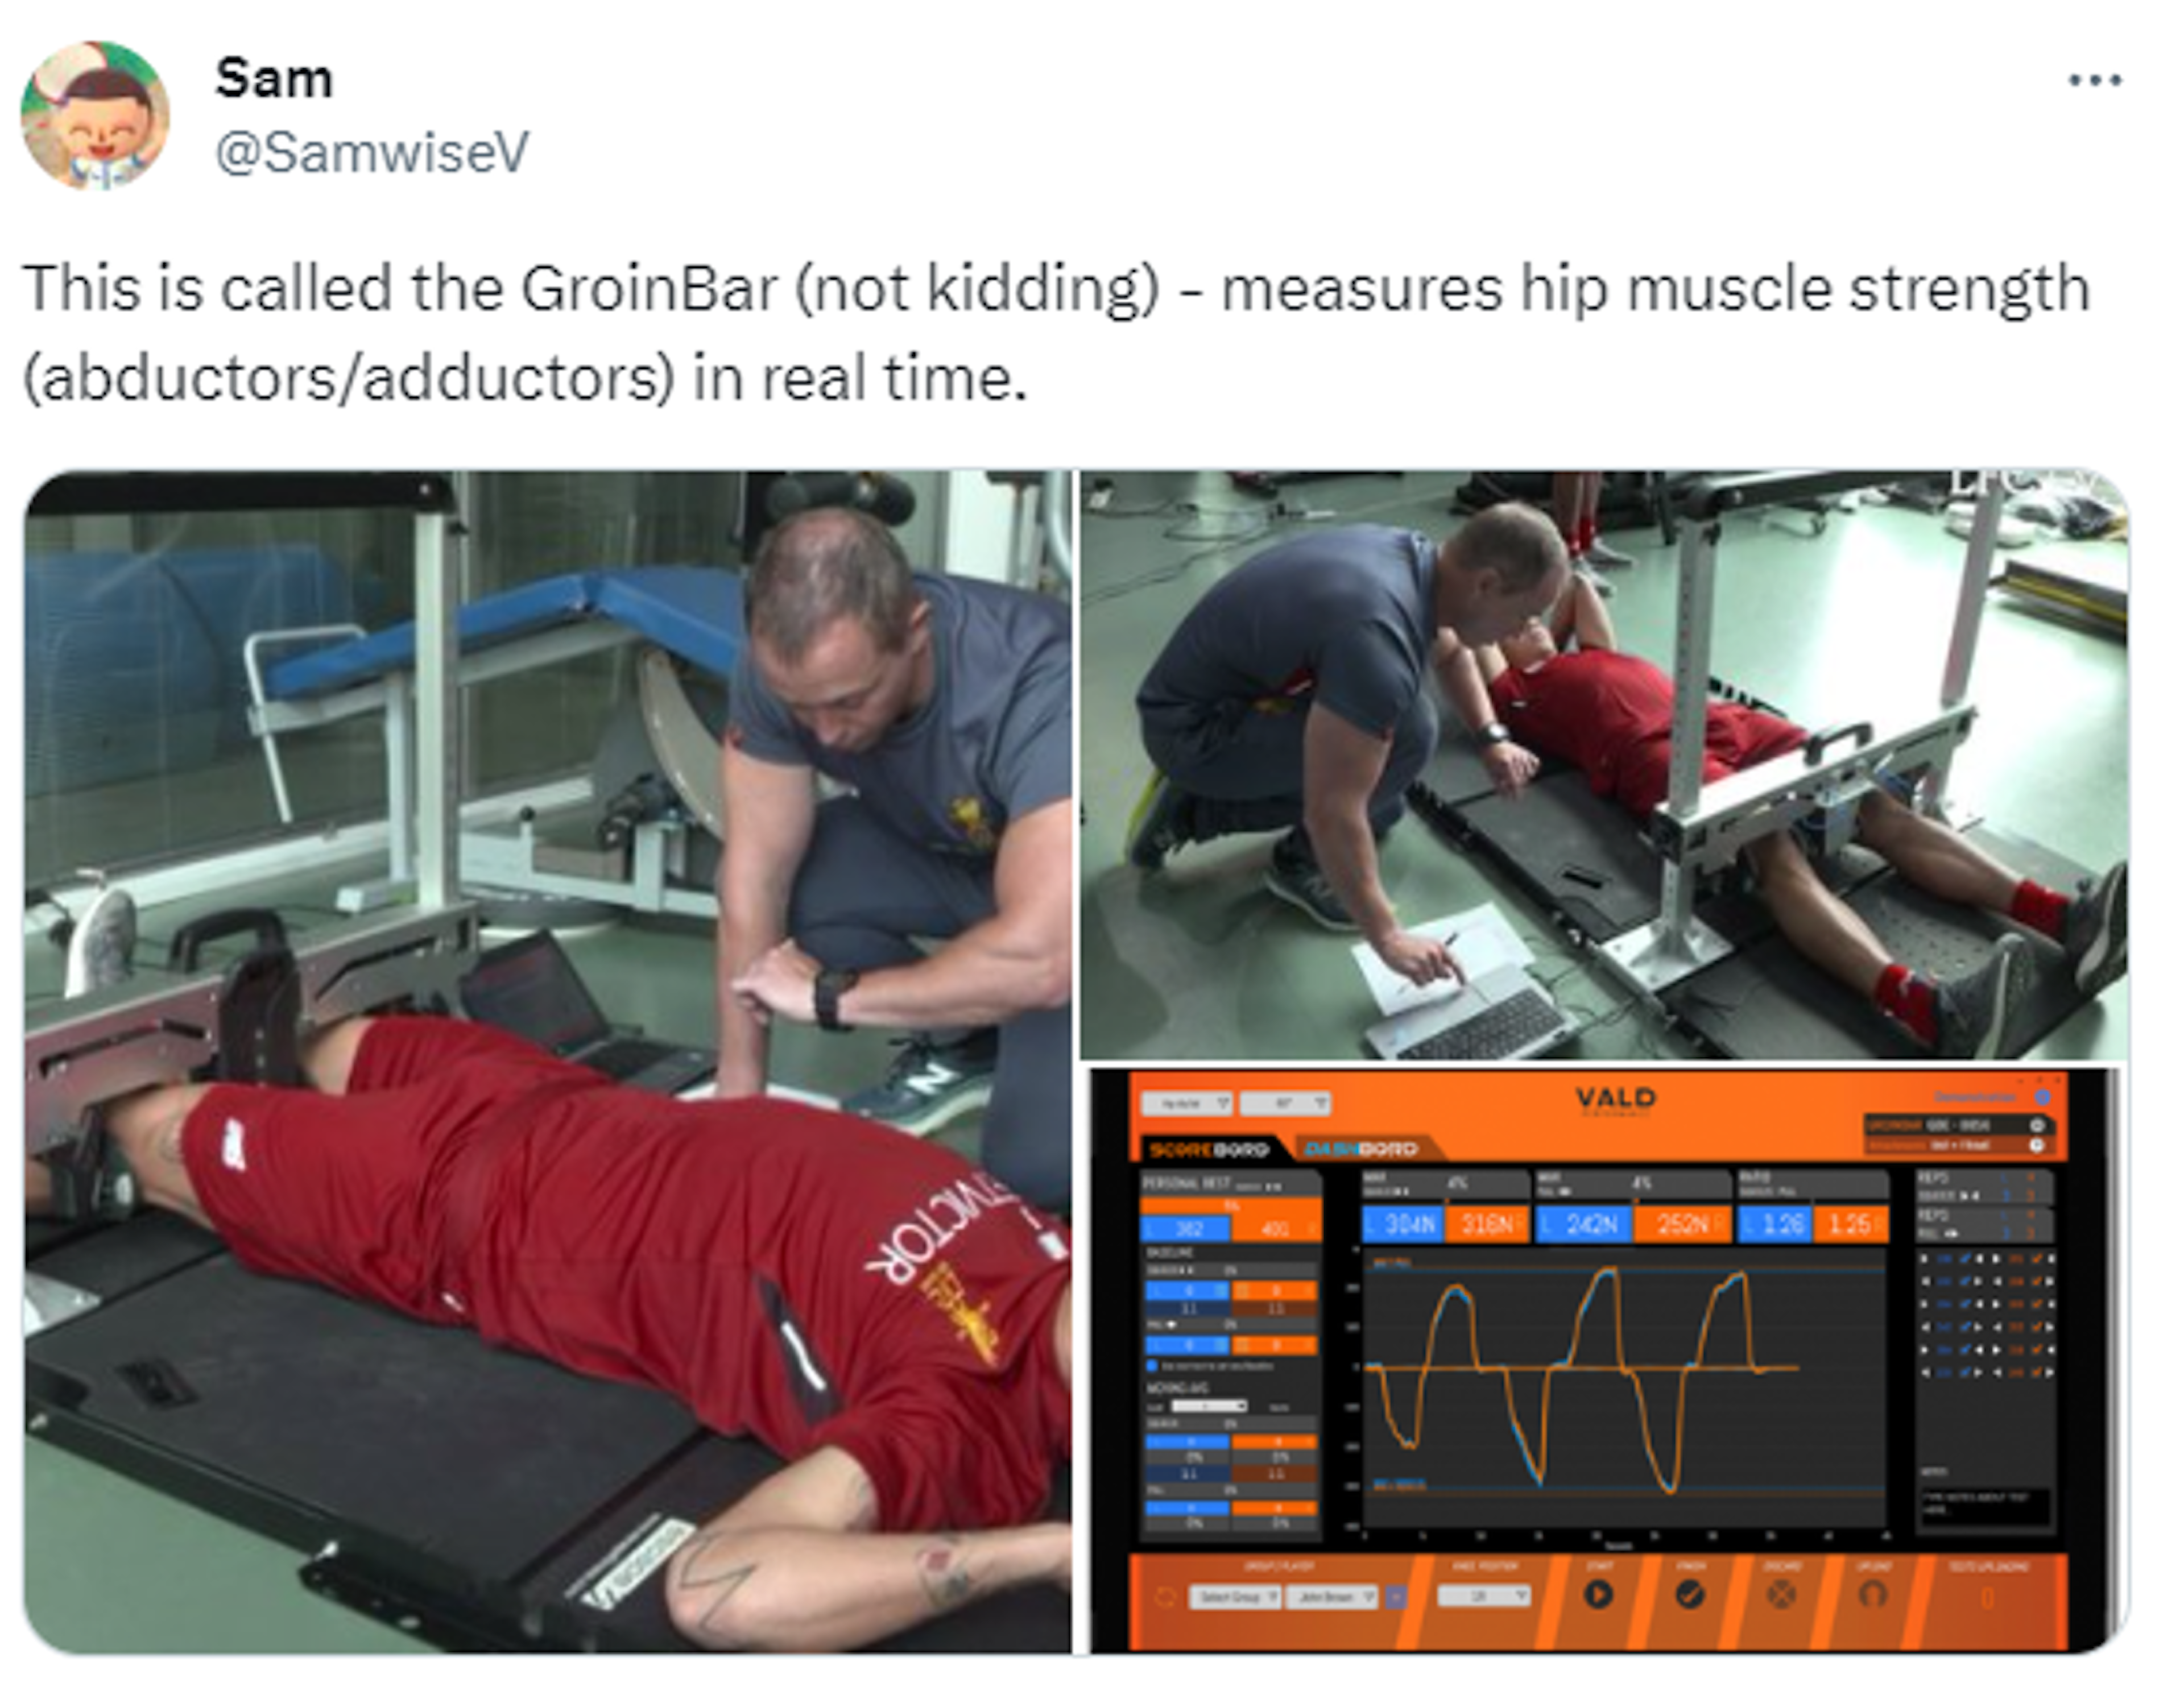 The “GroinBar” soon after its launch in 2017, being used to test Liverpool Football Club player Roberto Firmino. Many English Premier League teams were early adopters of the GroinBar.